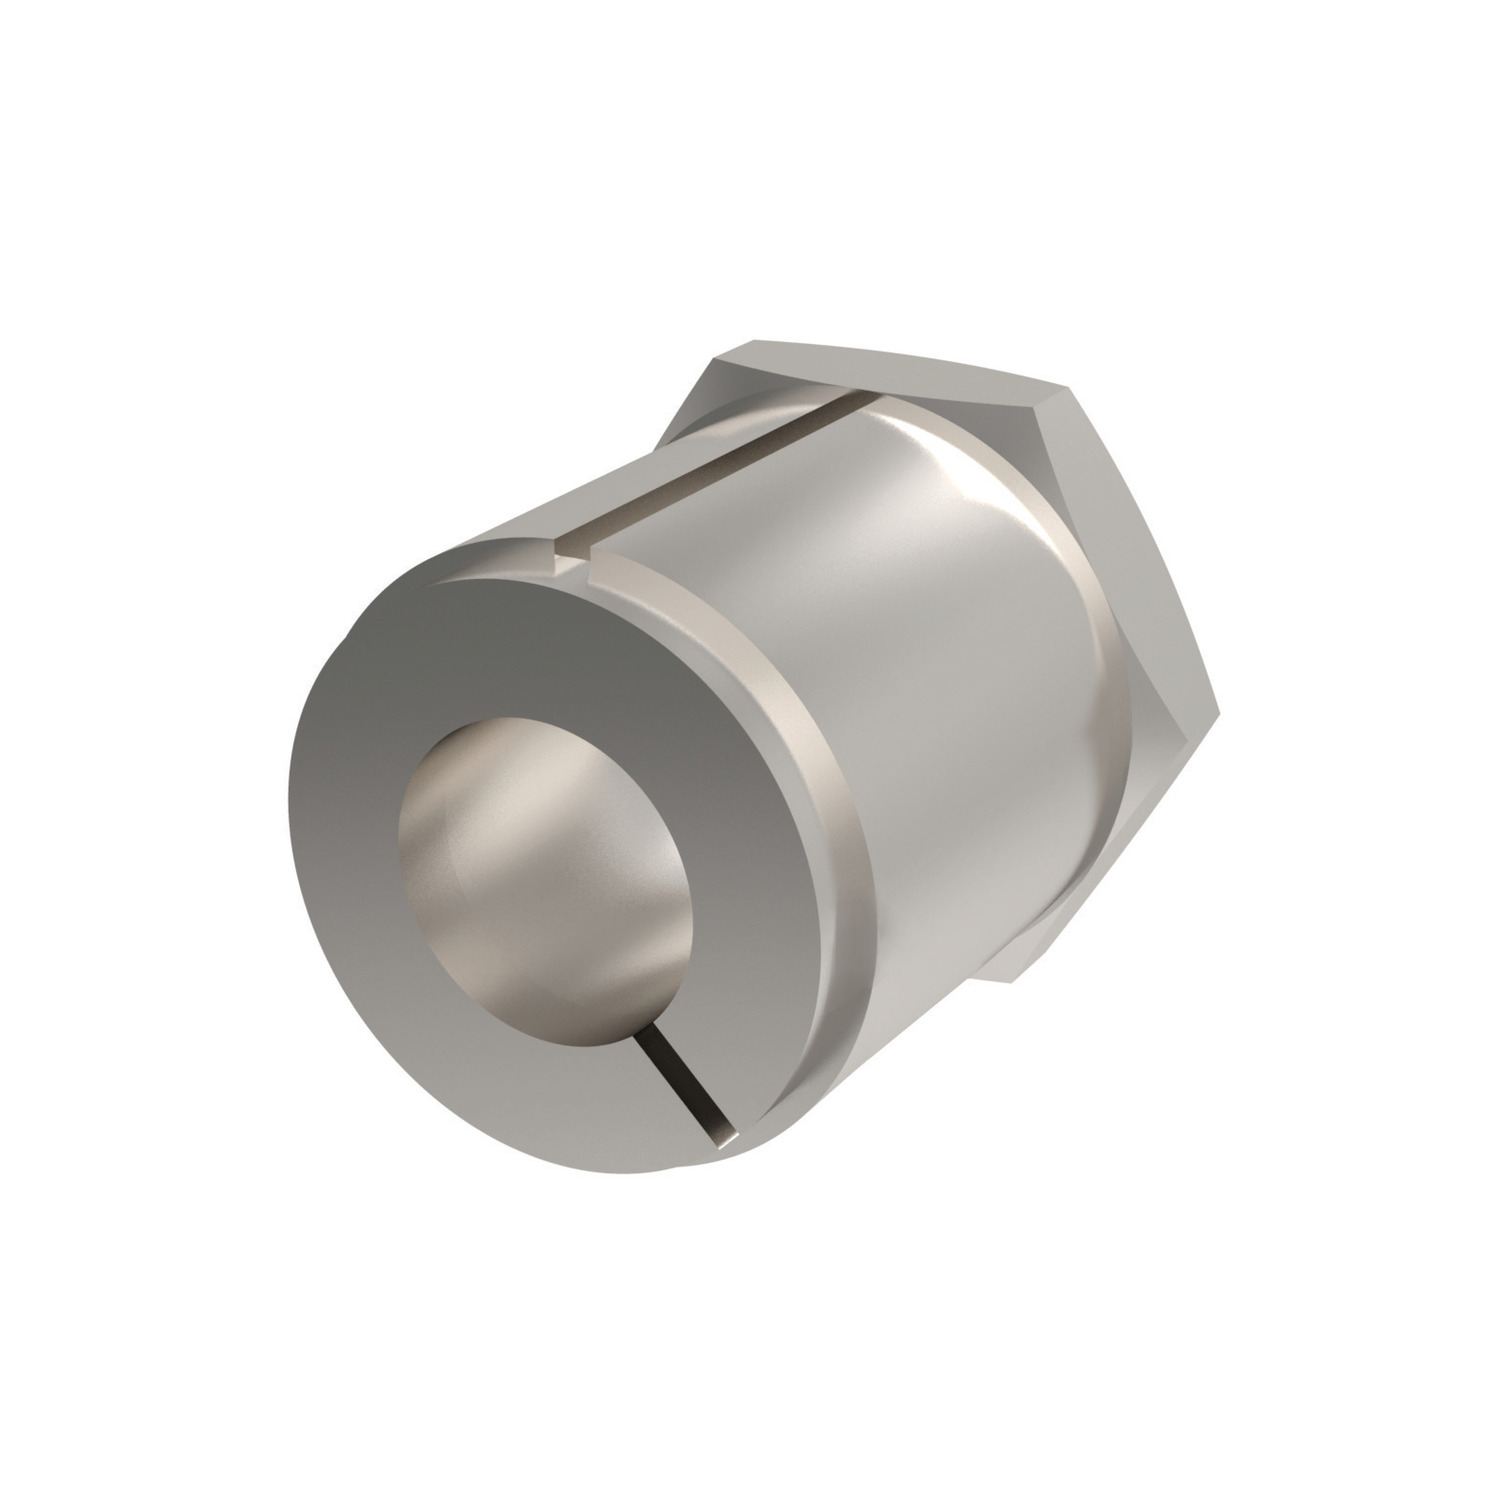 R3220 - Stainless Taper Bushes